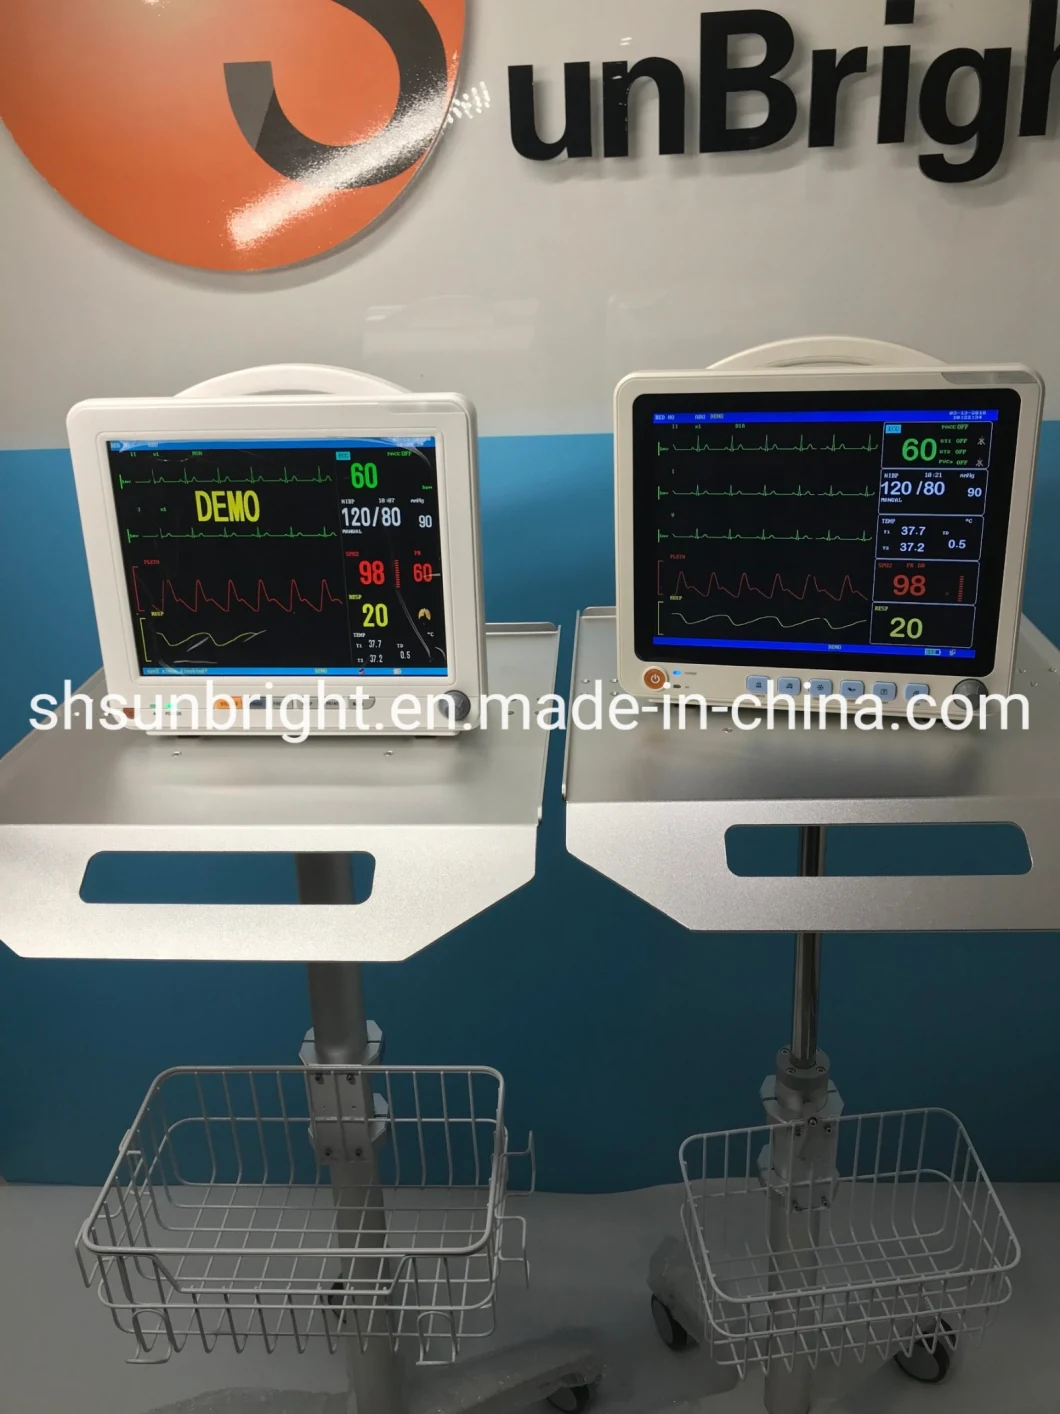 Fetal Acoustic Simulator Technology Cardiotocography Emergency Hospital ICU Patient Monitor